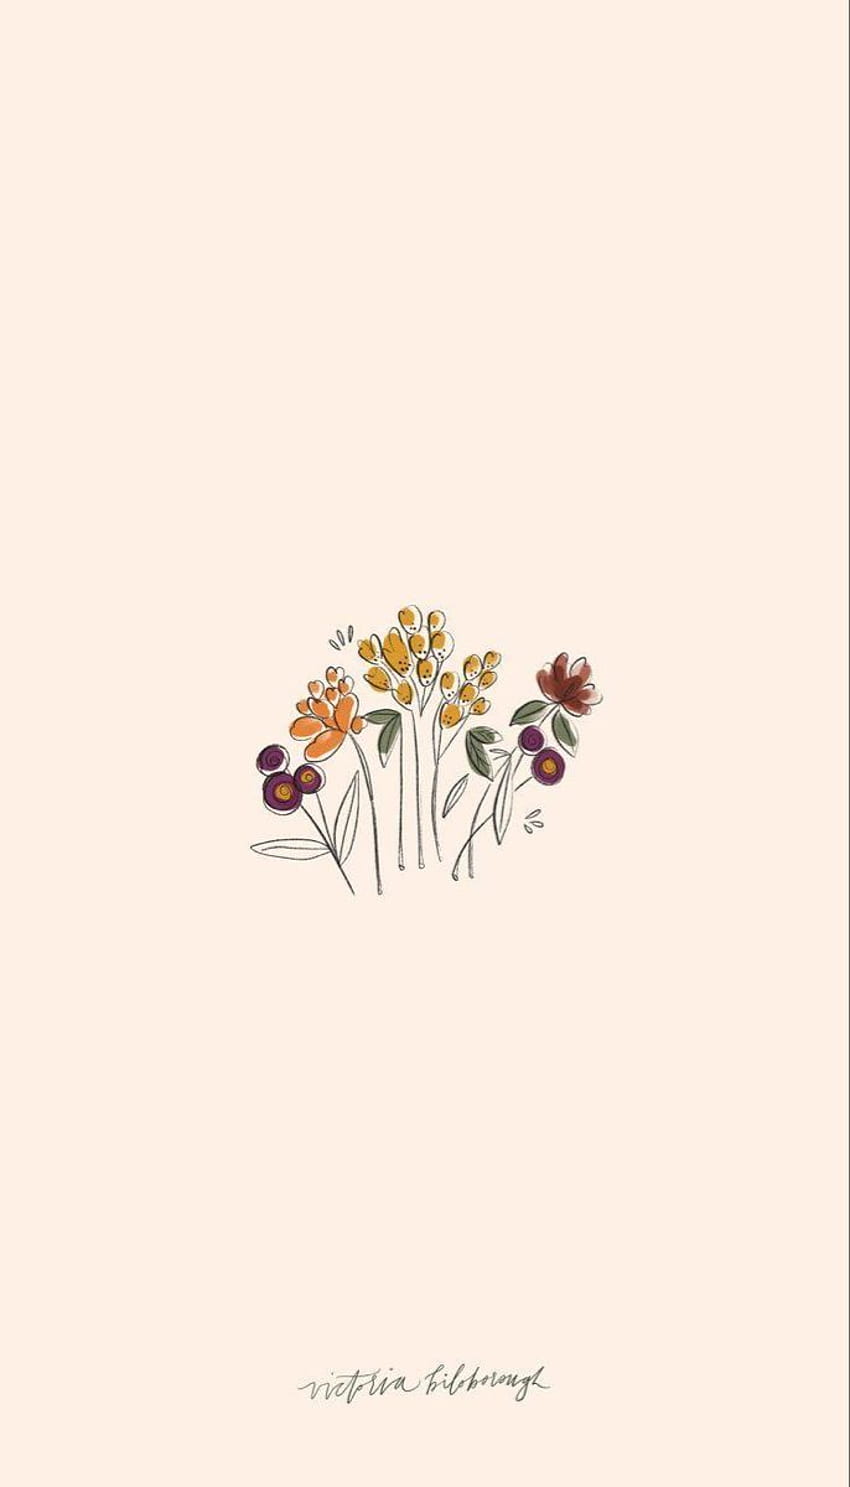 IPhone wallpaper with a small illustration of flowers - Minimalist